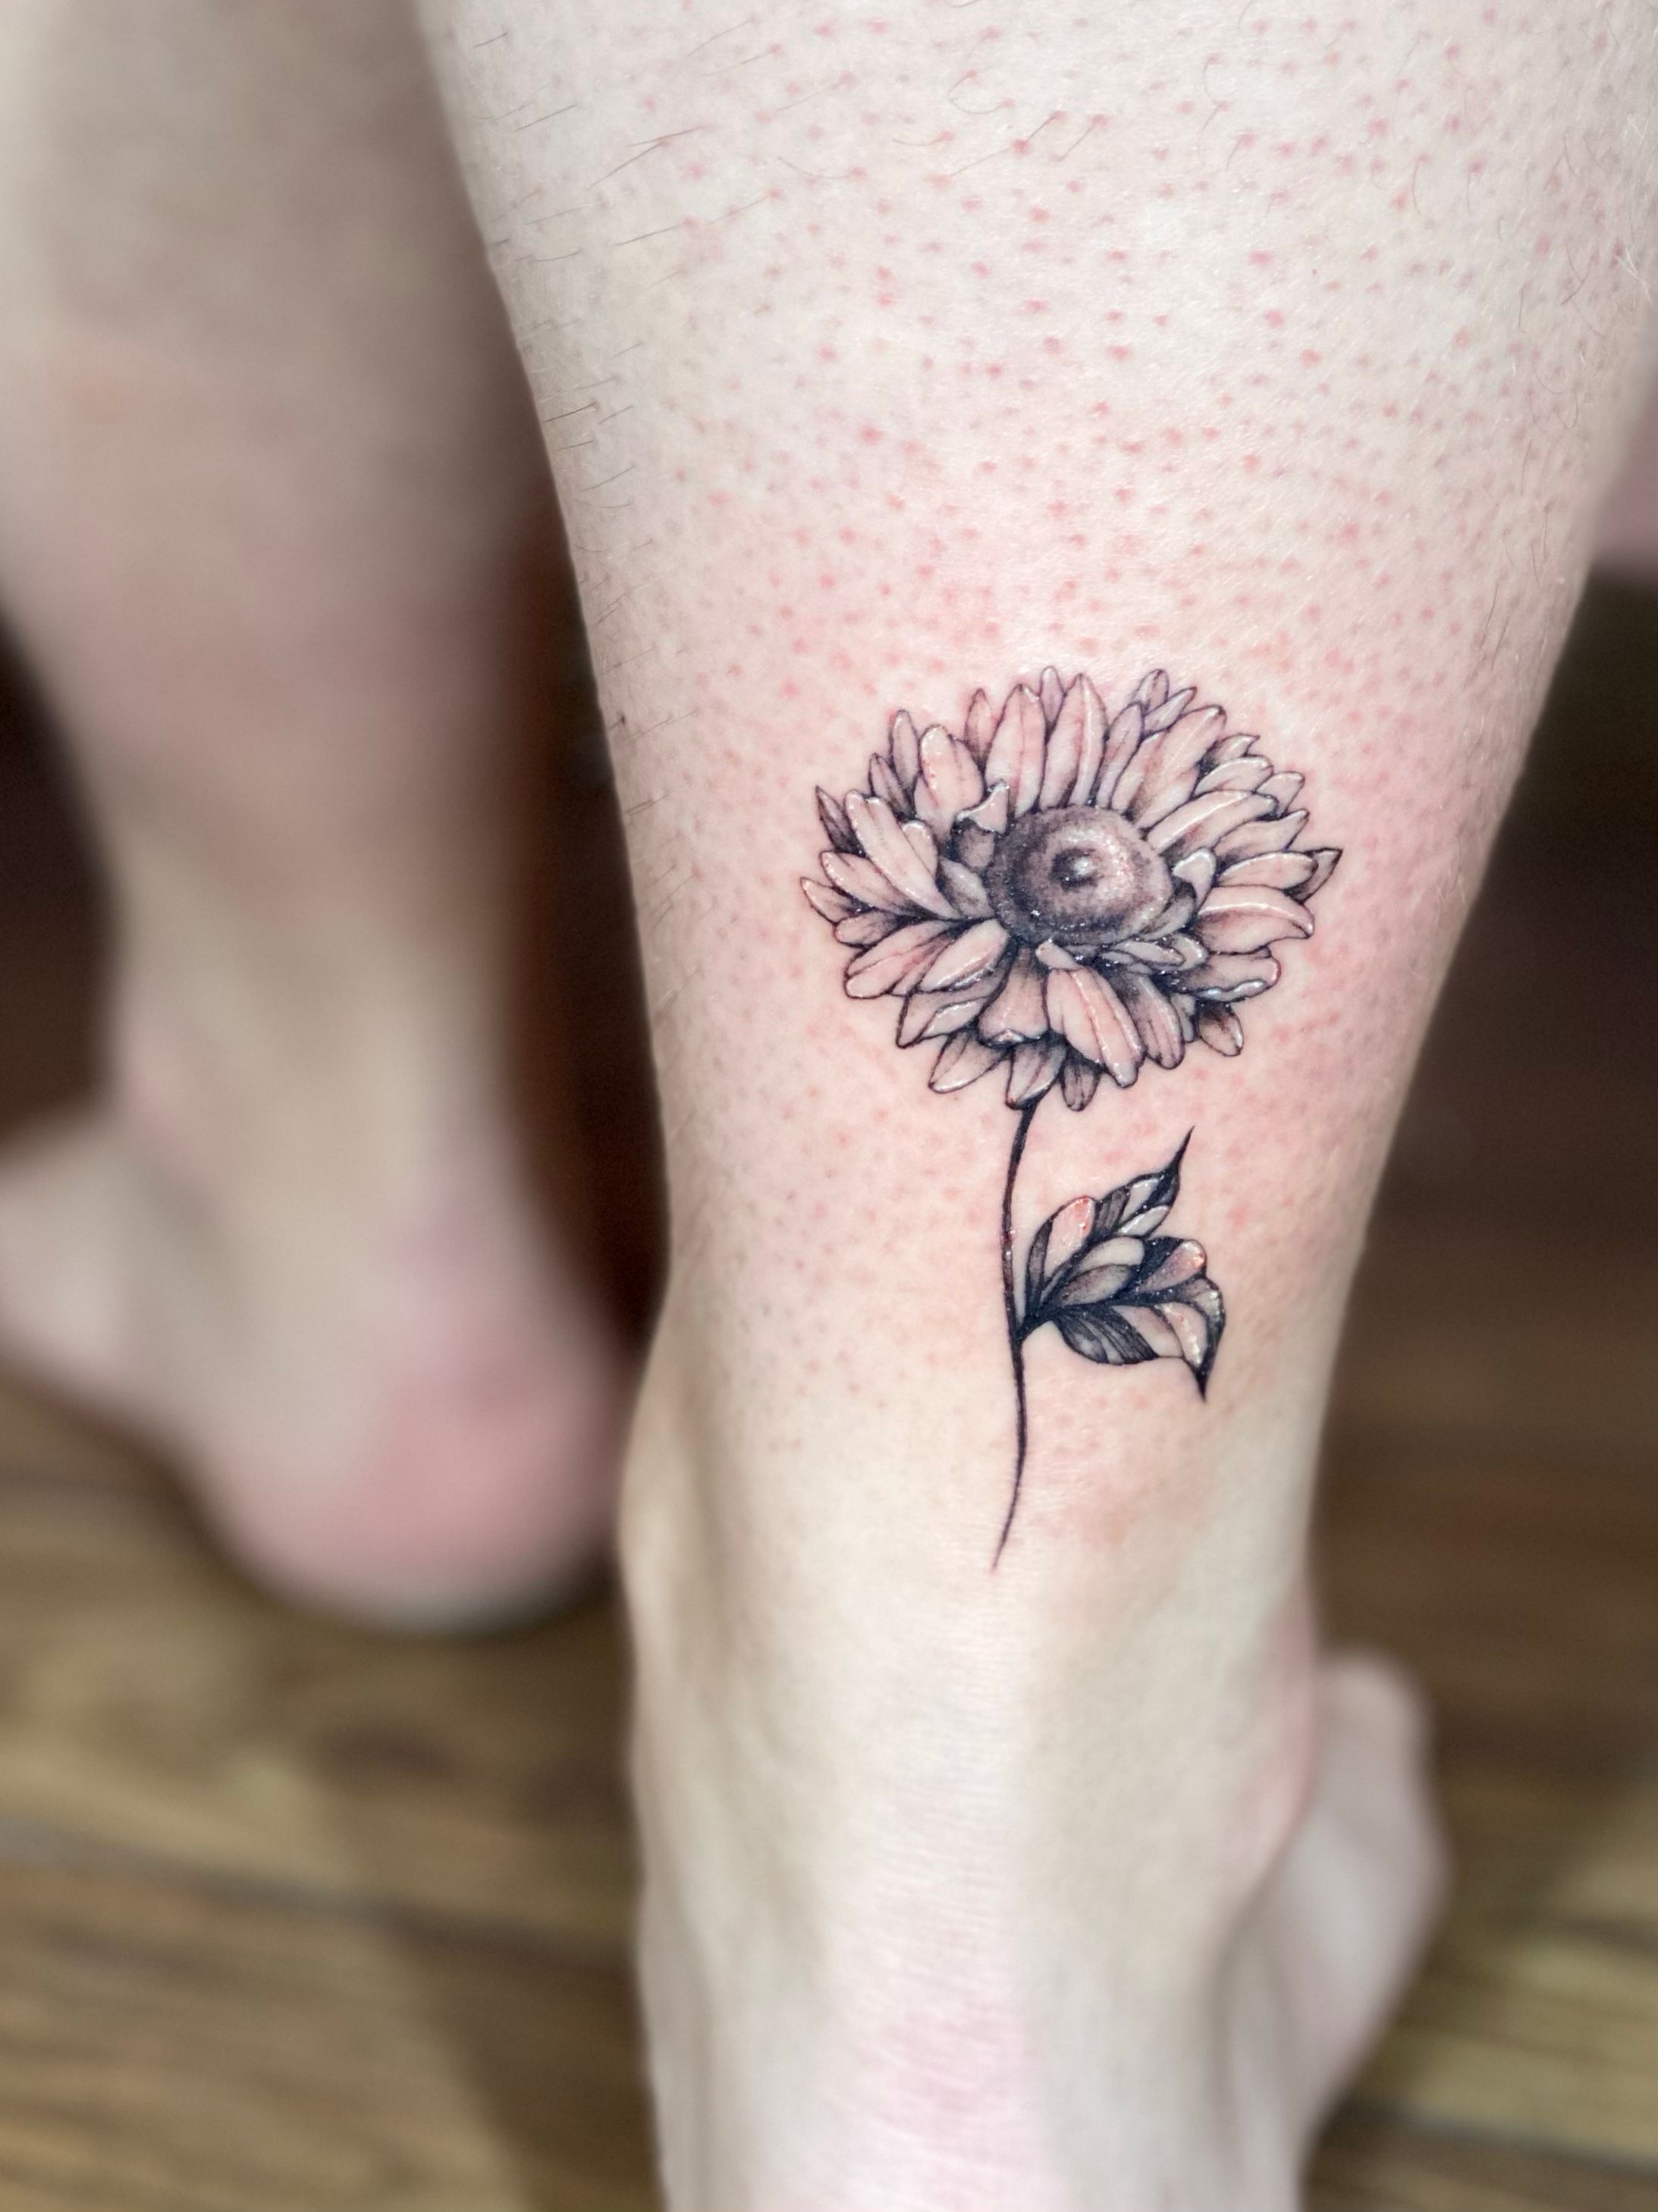 Some flowers (unfinished) and a rabbits foot! Stephen, apprentice at  Taunton Tattoo in Oshawa Canada. IG: stephenjpolito going to do colour on  the flowers next month! : r/TattooApprentice